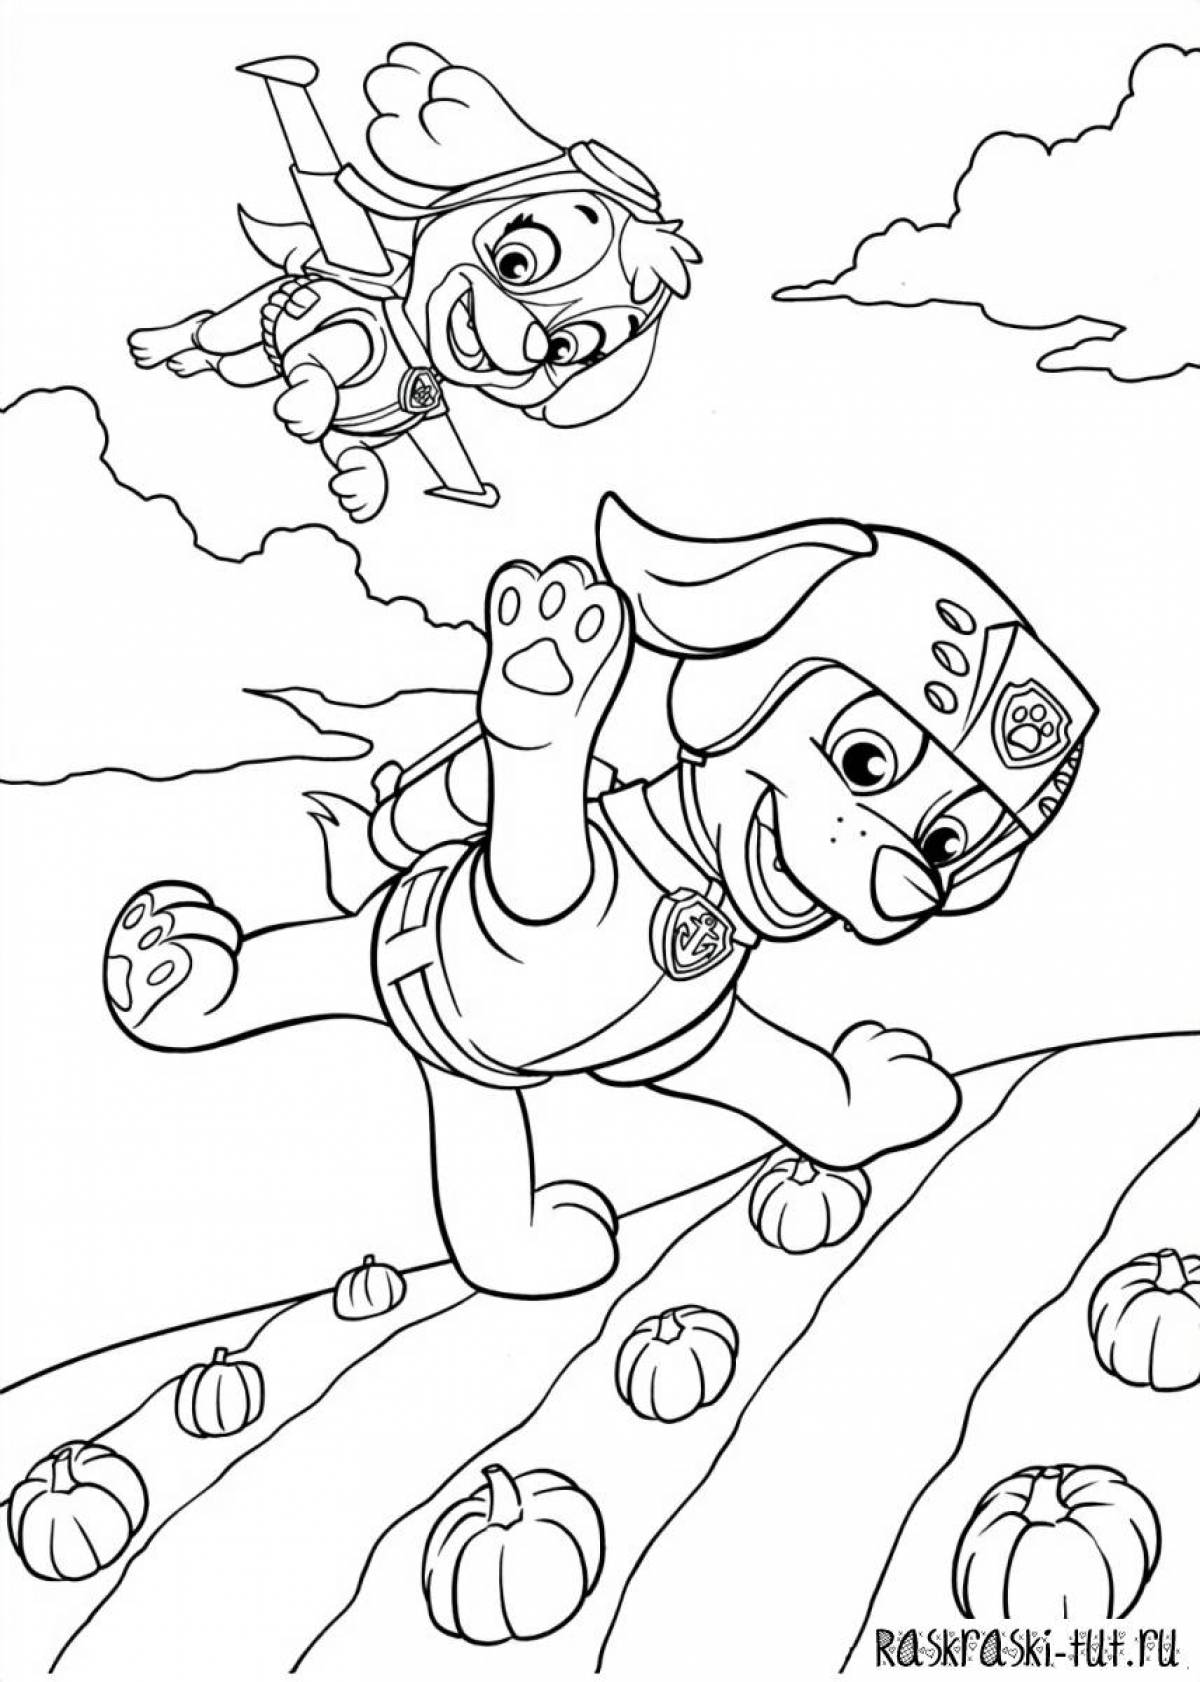 Coloring book exciting zuma